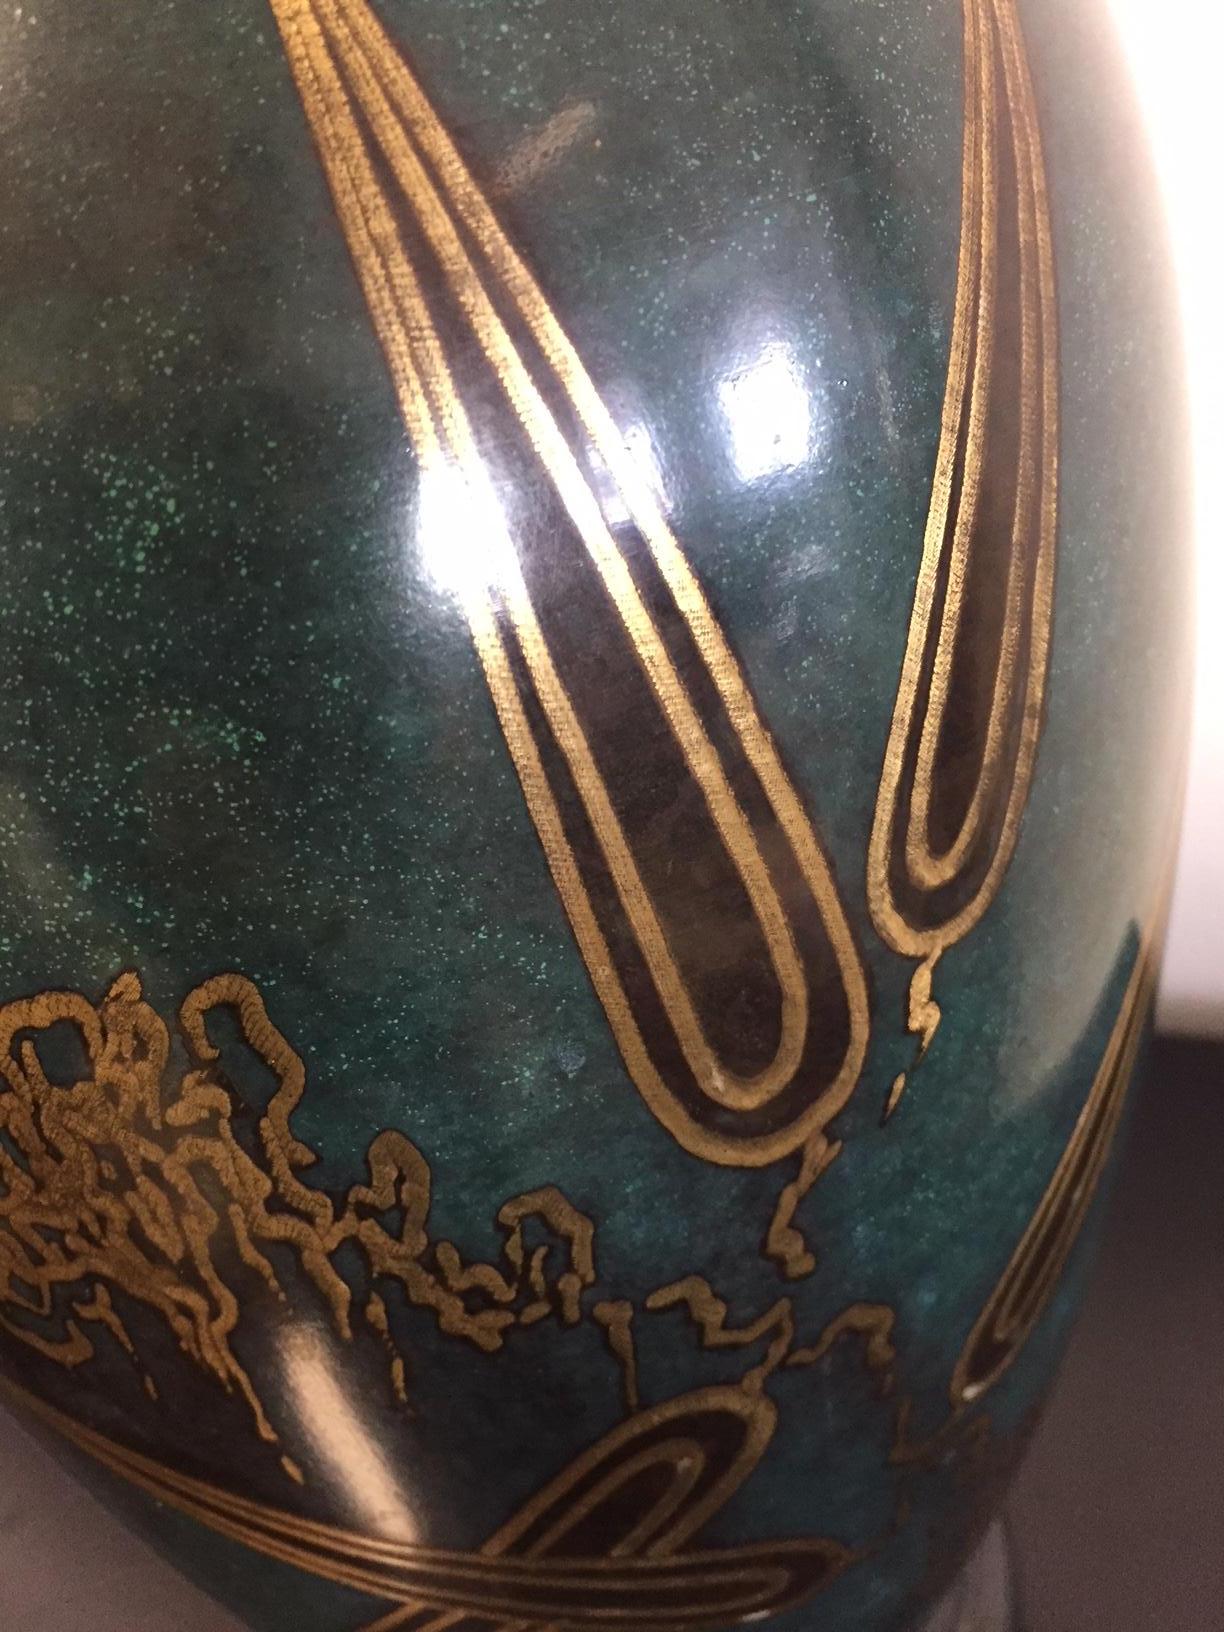 WMF Ikora Art Deco metal vase dark color emerald blue green with bronze,
Asian inspired decor Art Deco style.


WE ARE HAPPY TO PROVIDE A PRICE QUOTE OF THE PARCEL CHARGE TO YOUR DESTINATION